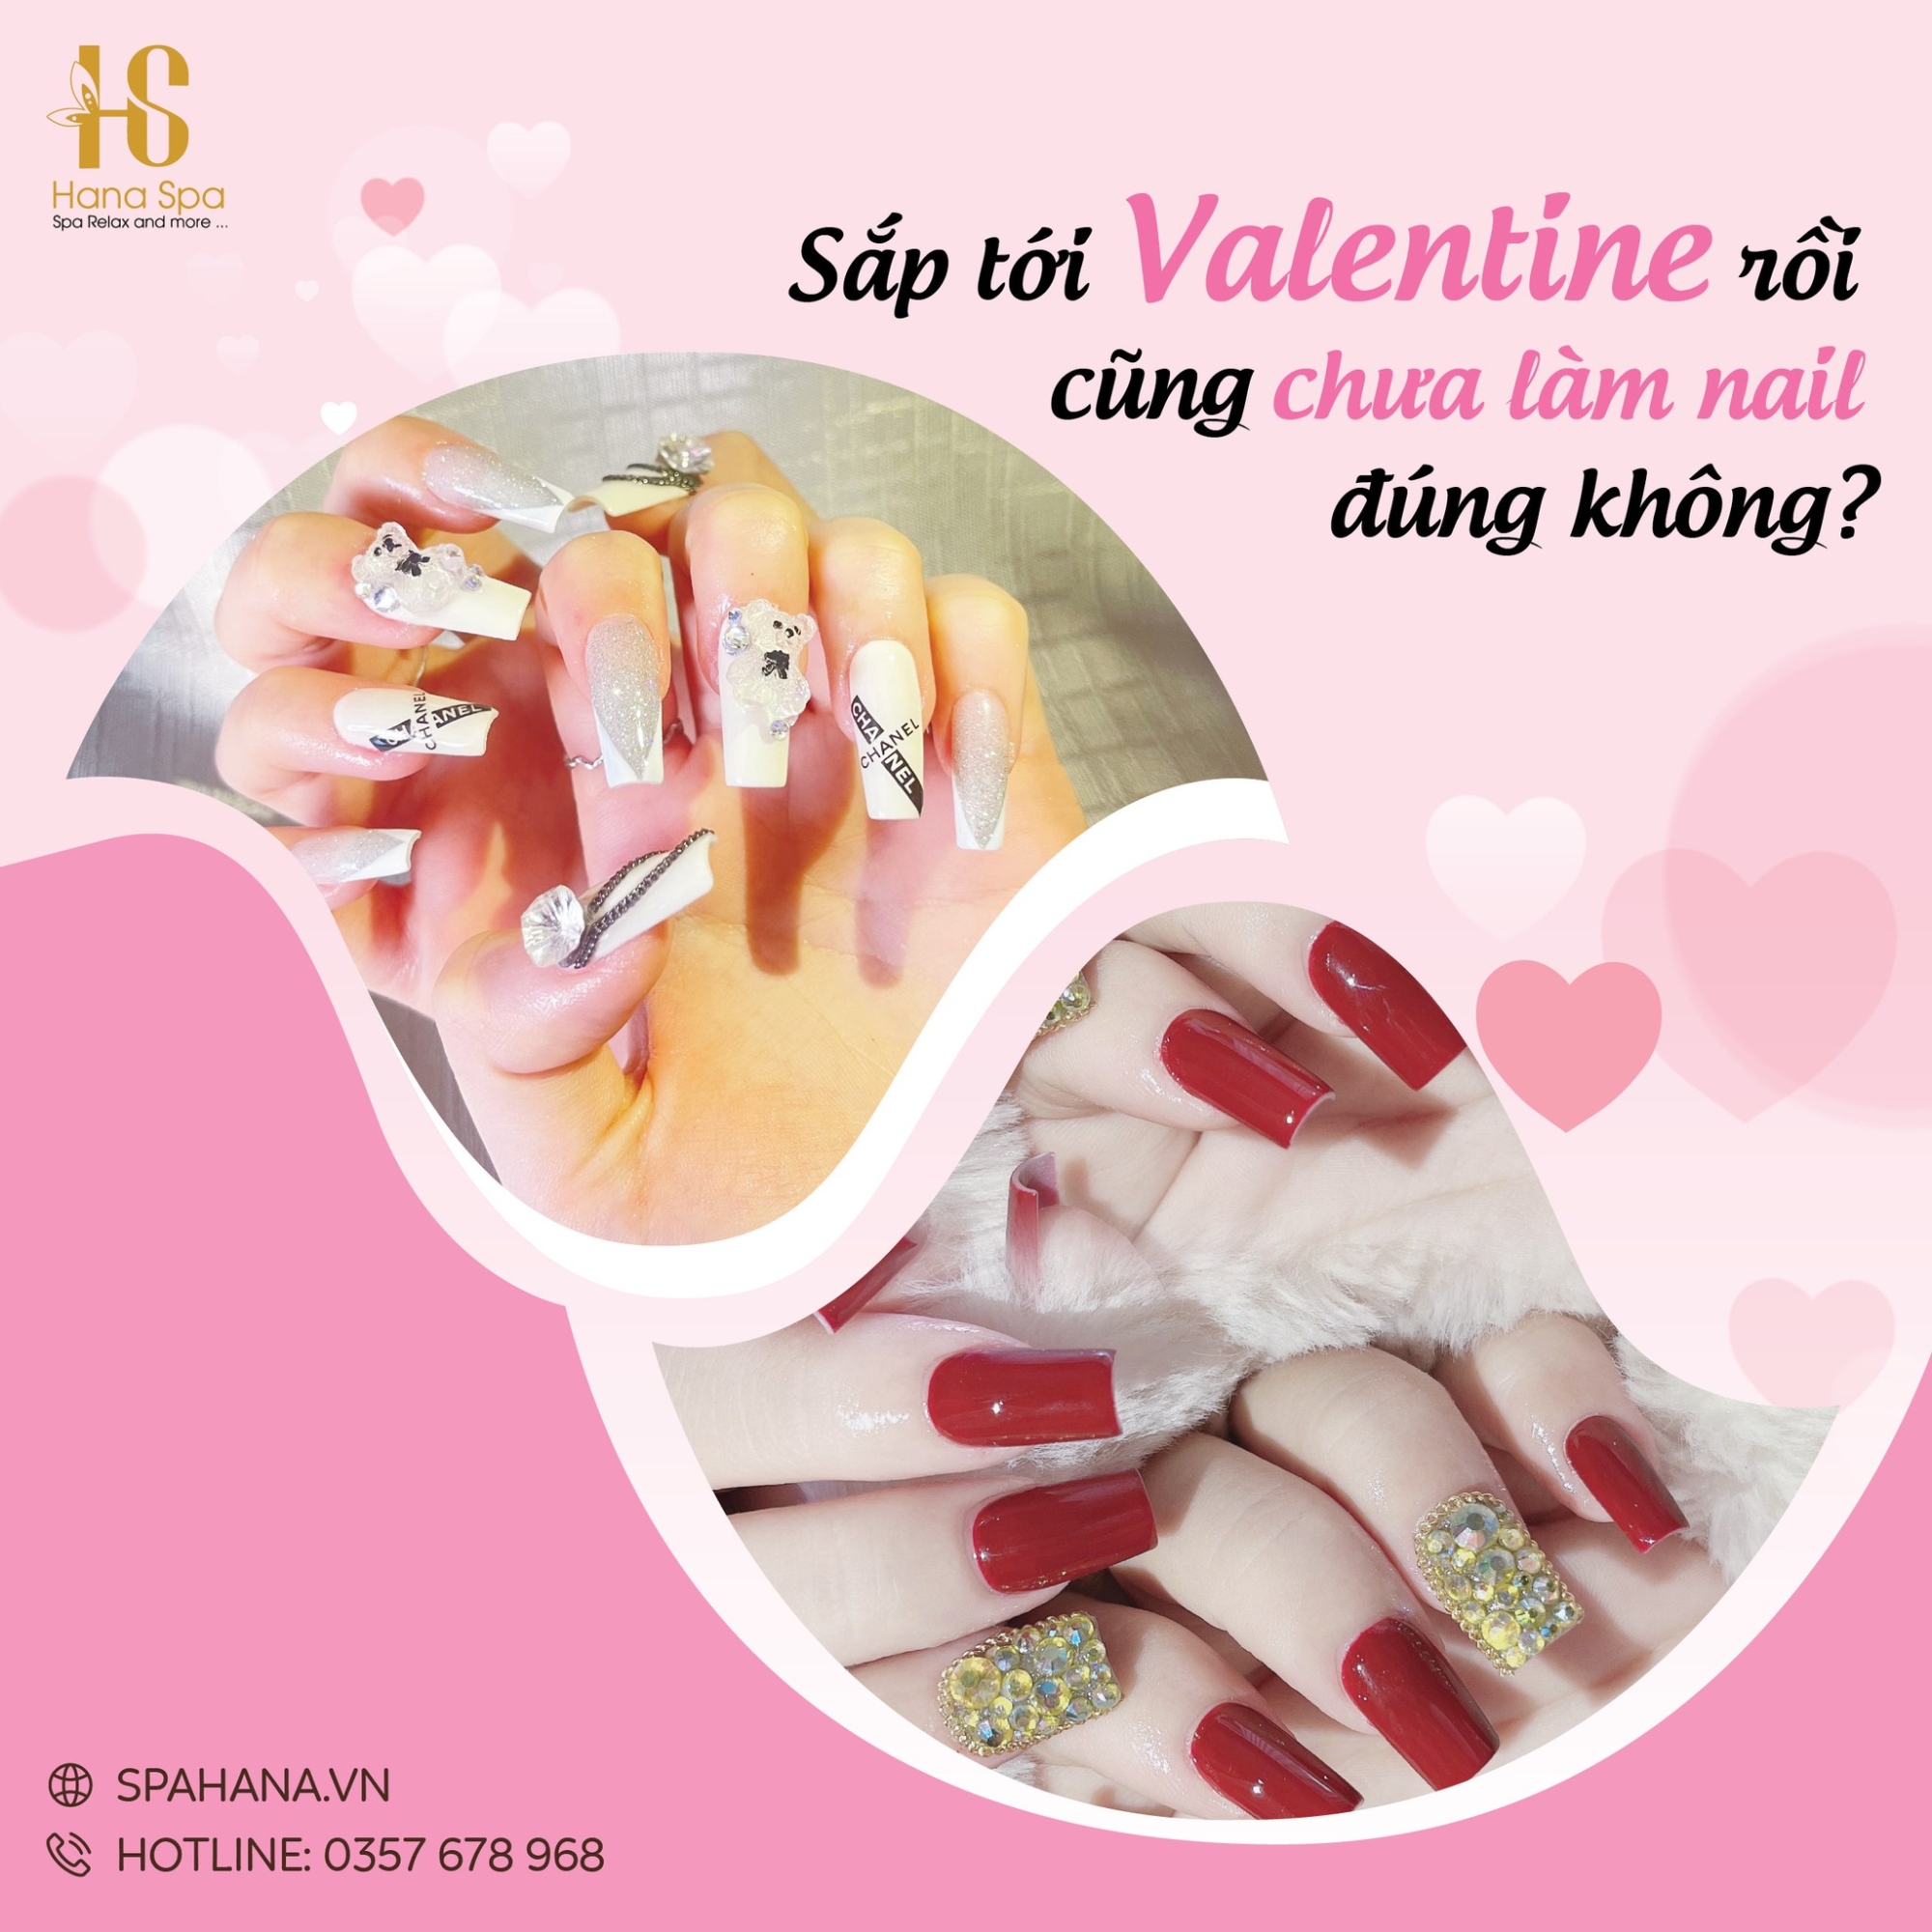 Nội dung trend Valentine